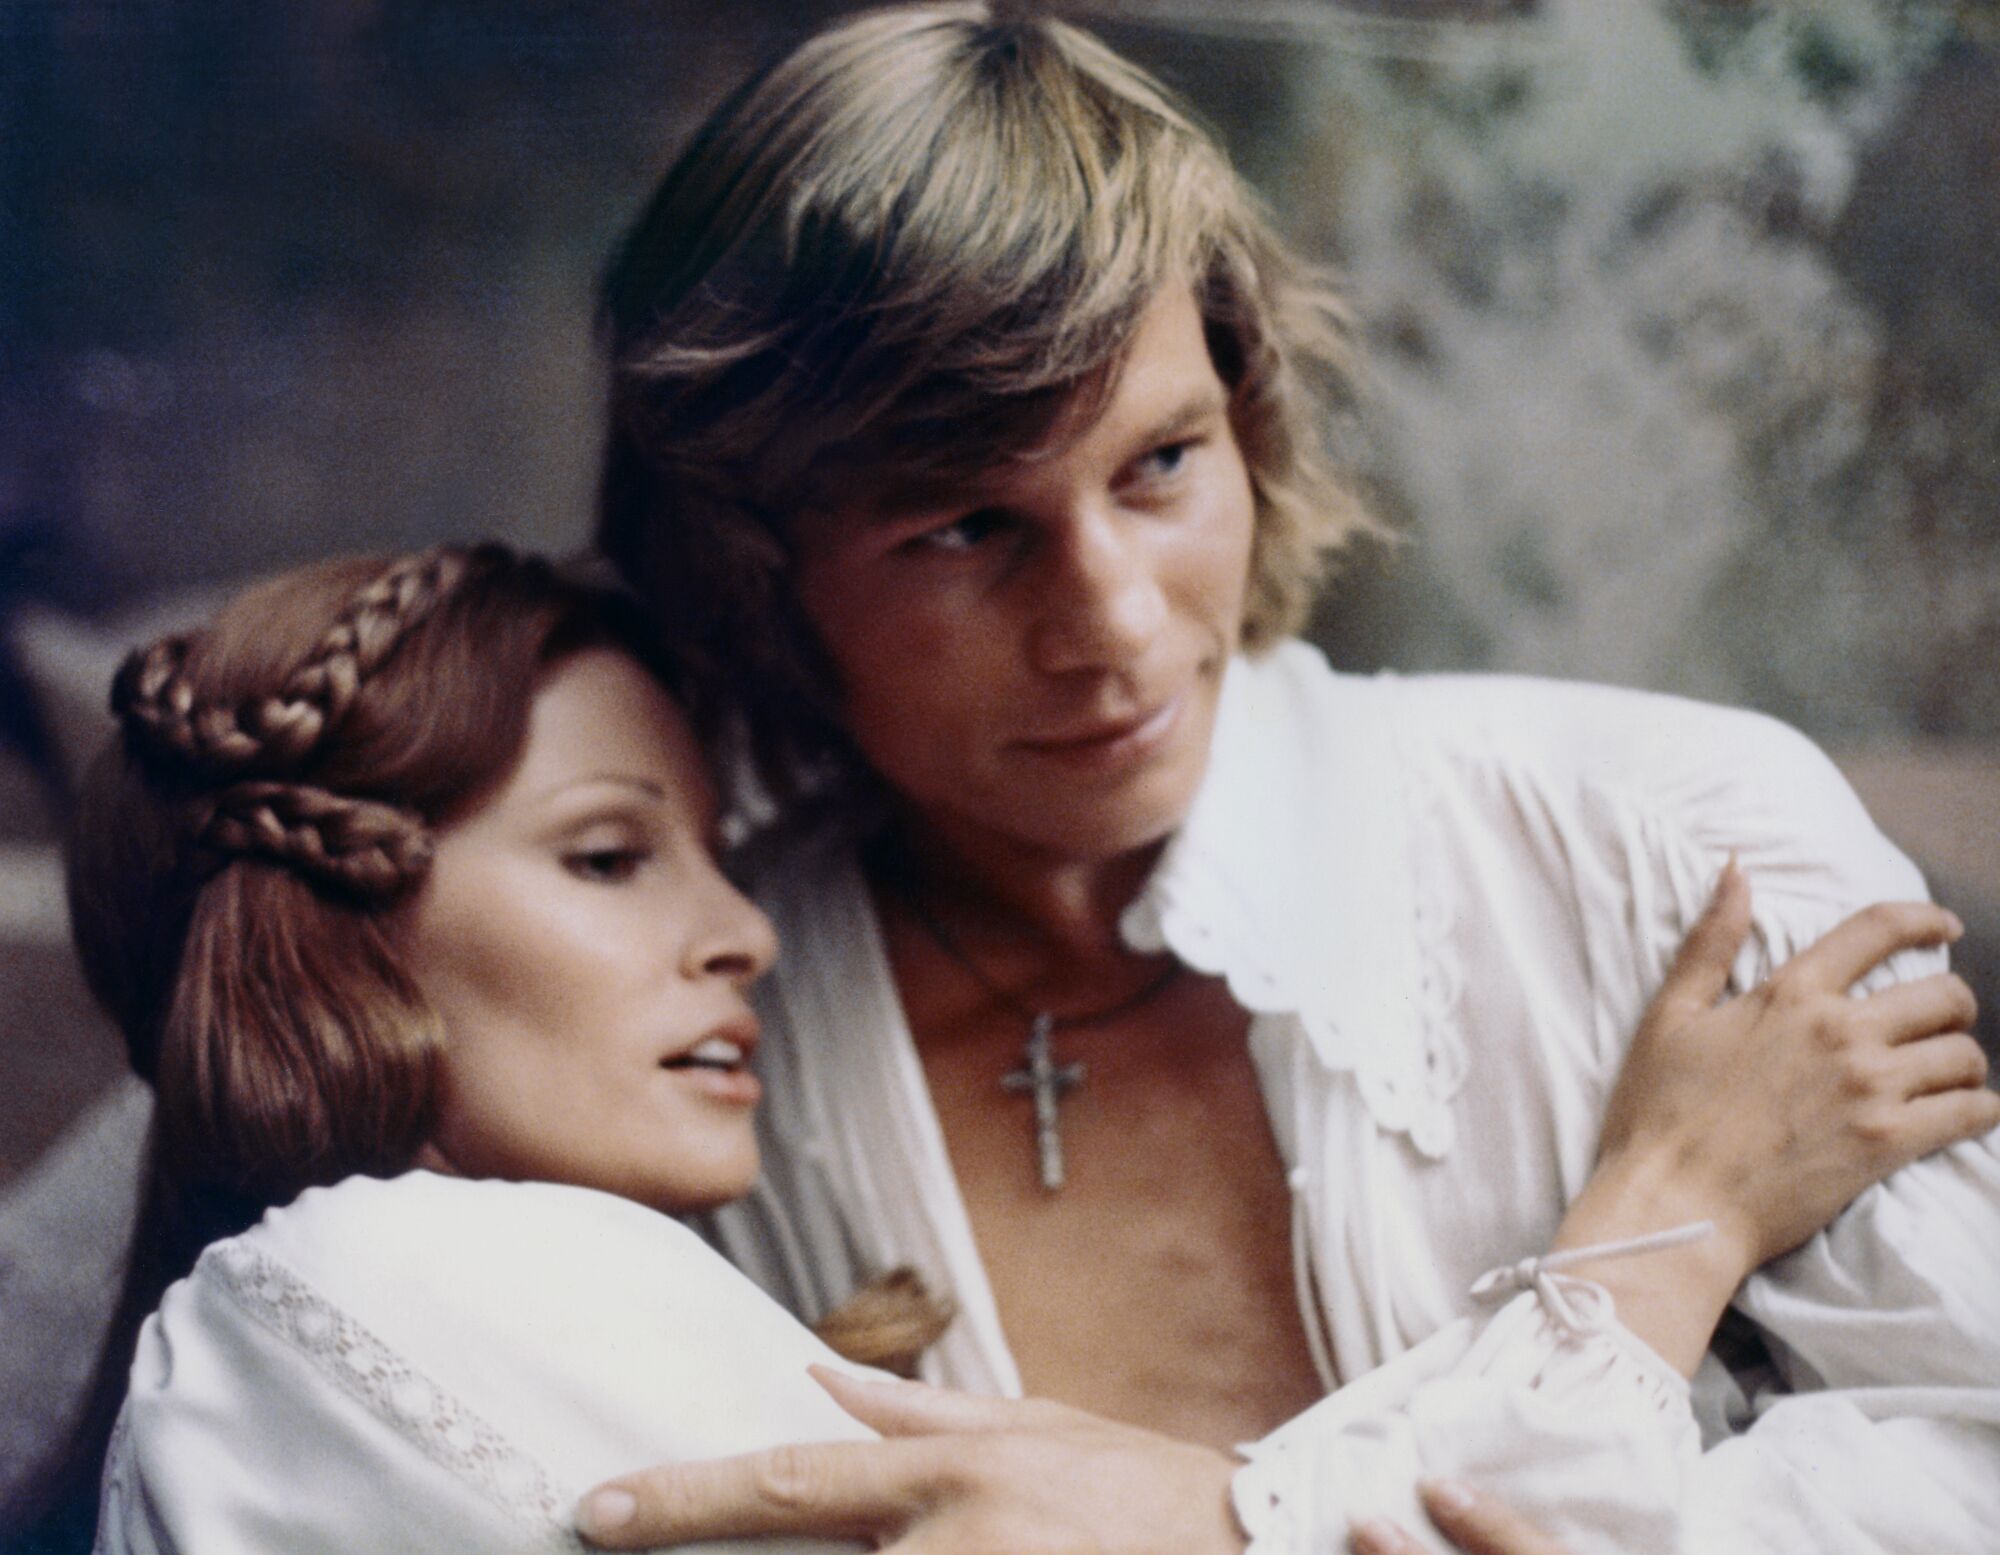 Raquel Welch and British actor Michael York embrace while filming The Three Musketeers.